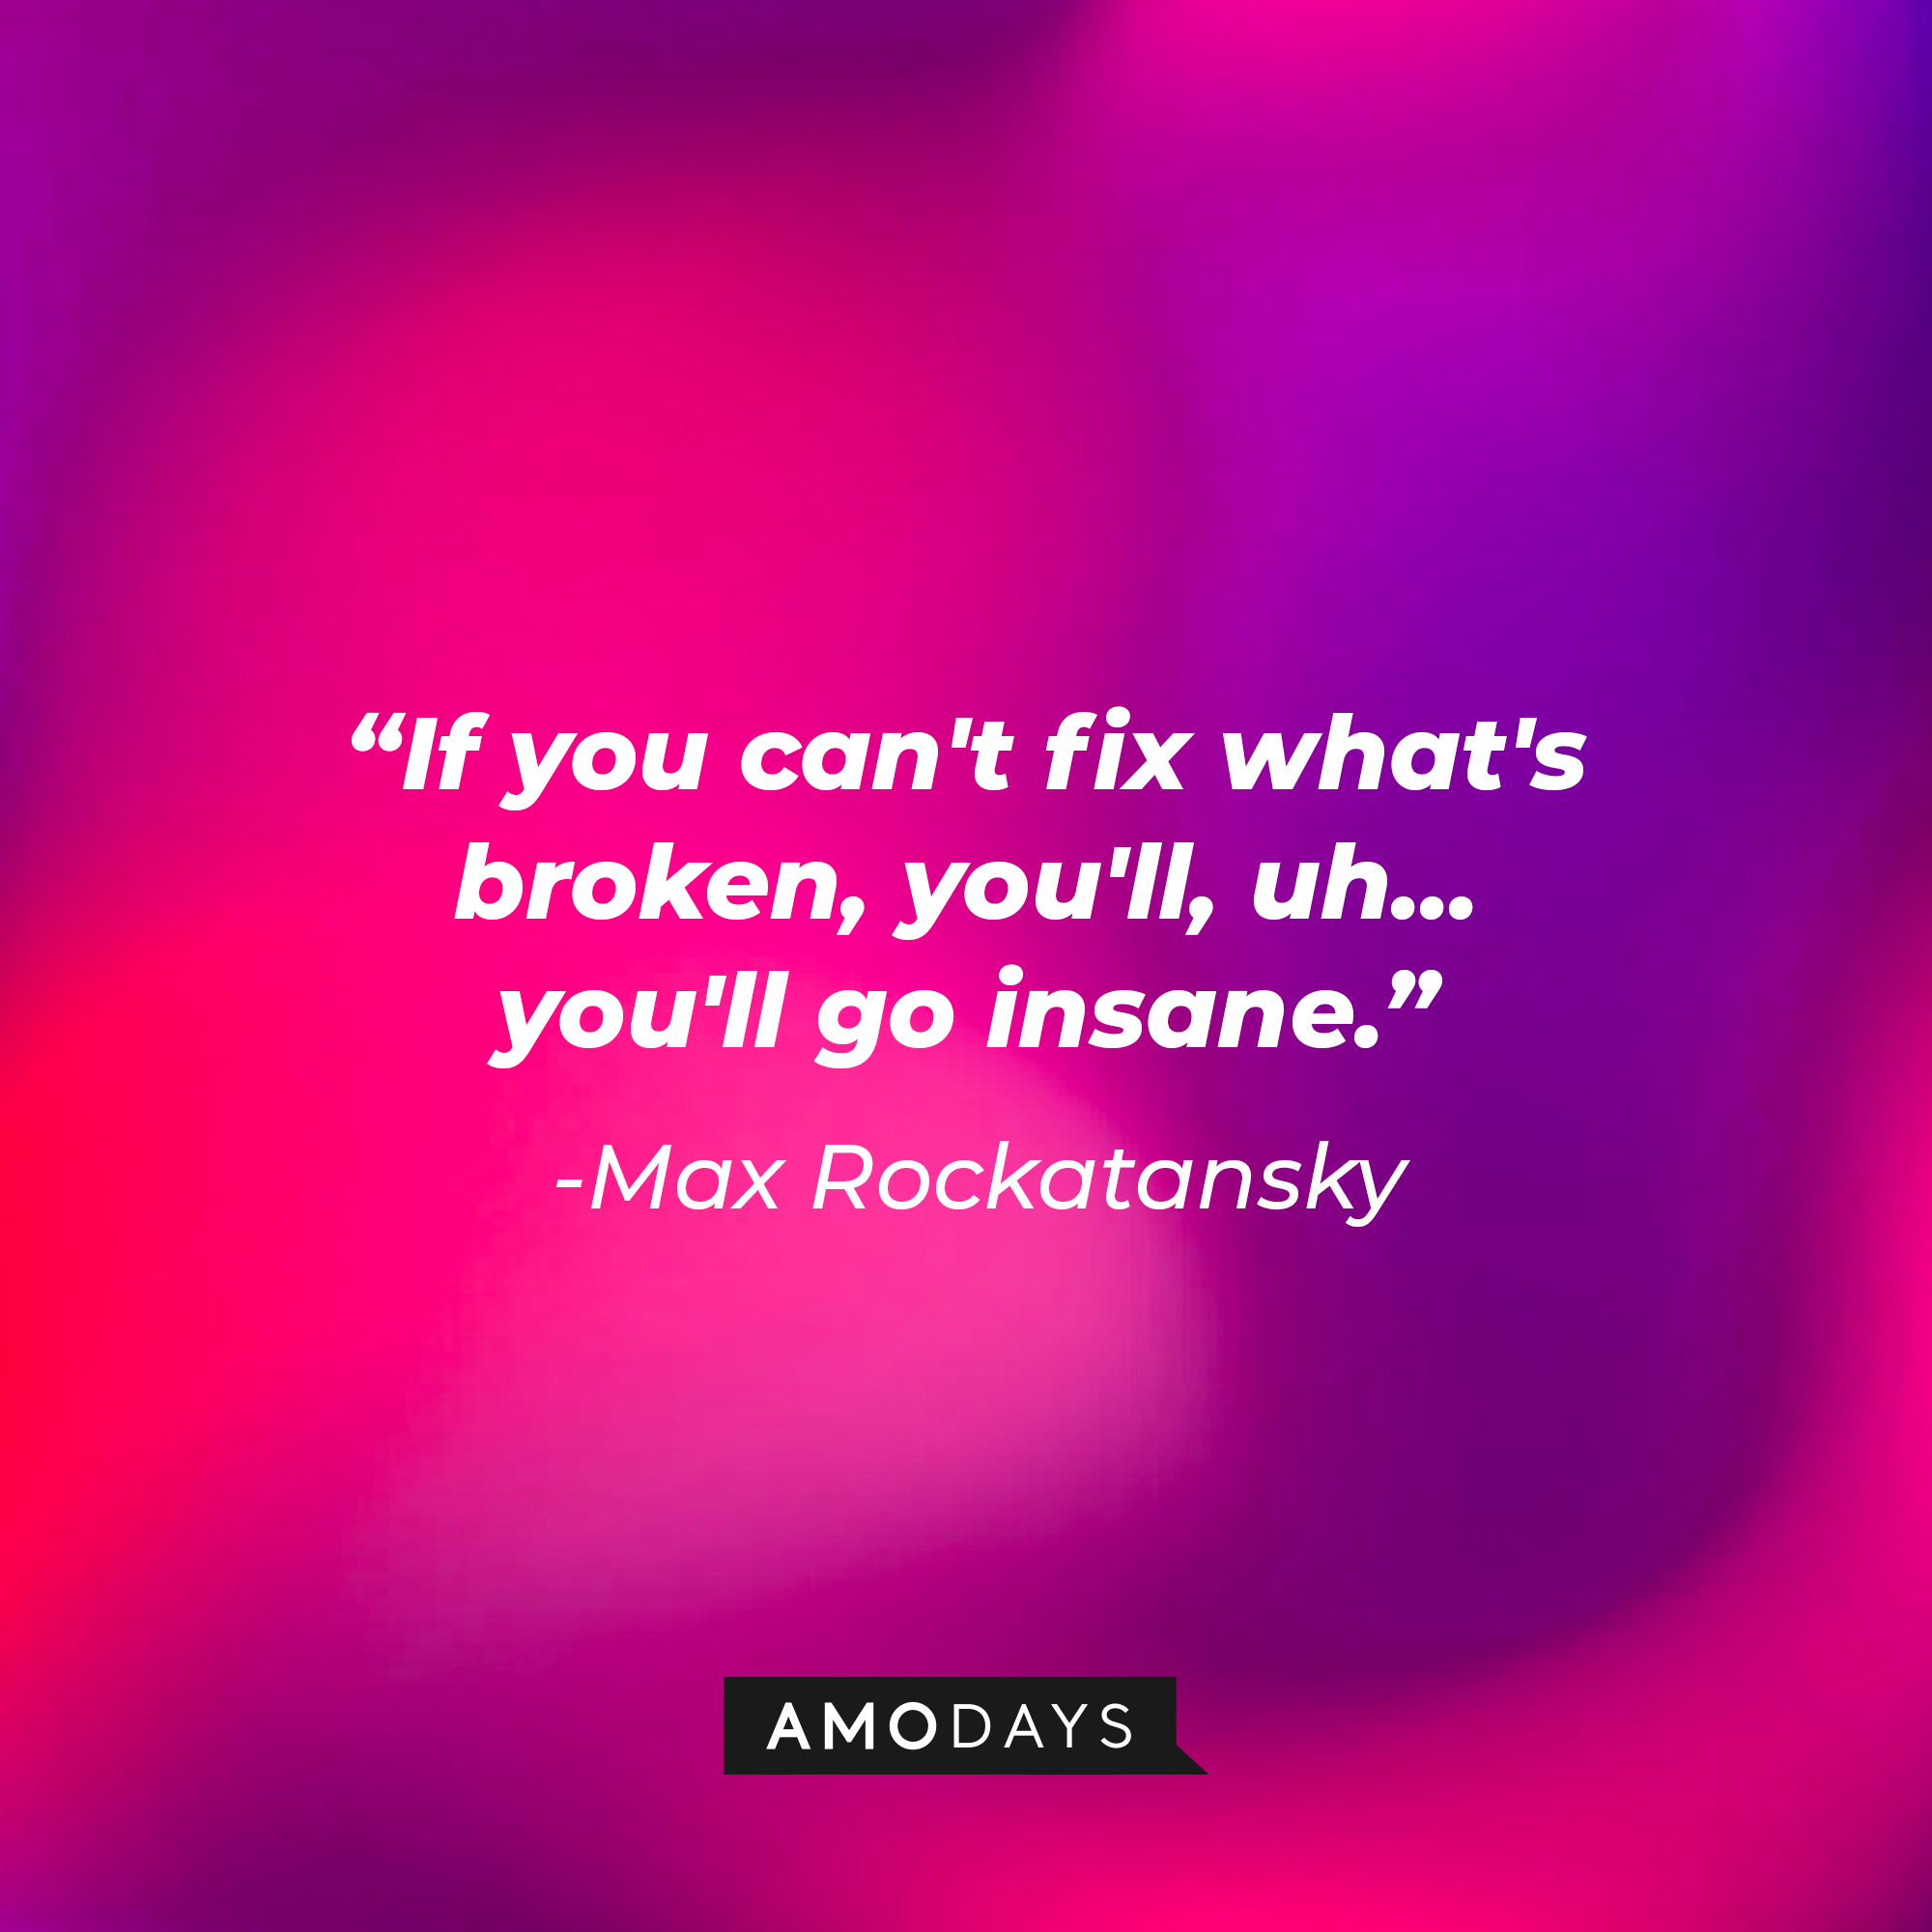 Max Rockatansky’s quote: "If you can't fix what's broken, you'll, uh... you'll go insane." | Source: AmoDays